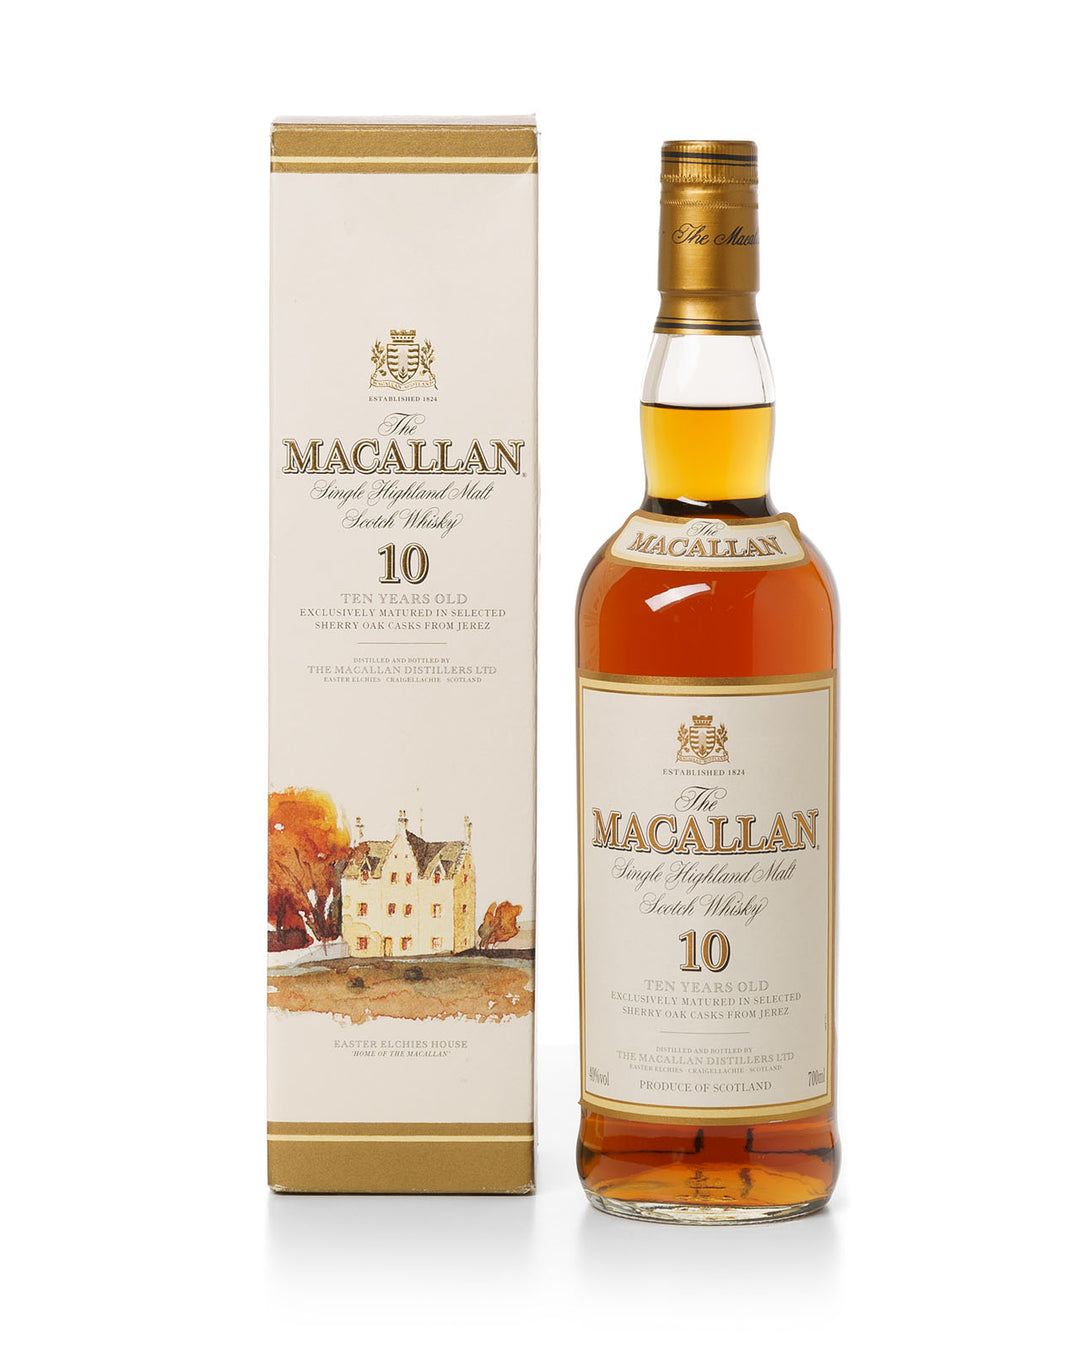 Macallan 10 Year Old Sherry Cask Bottled Early 2000's With Original Box